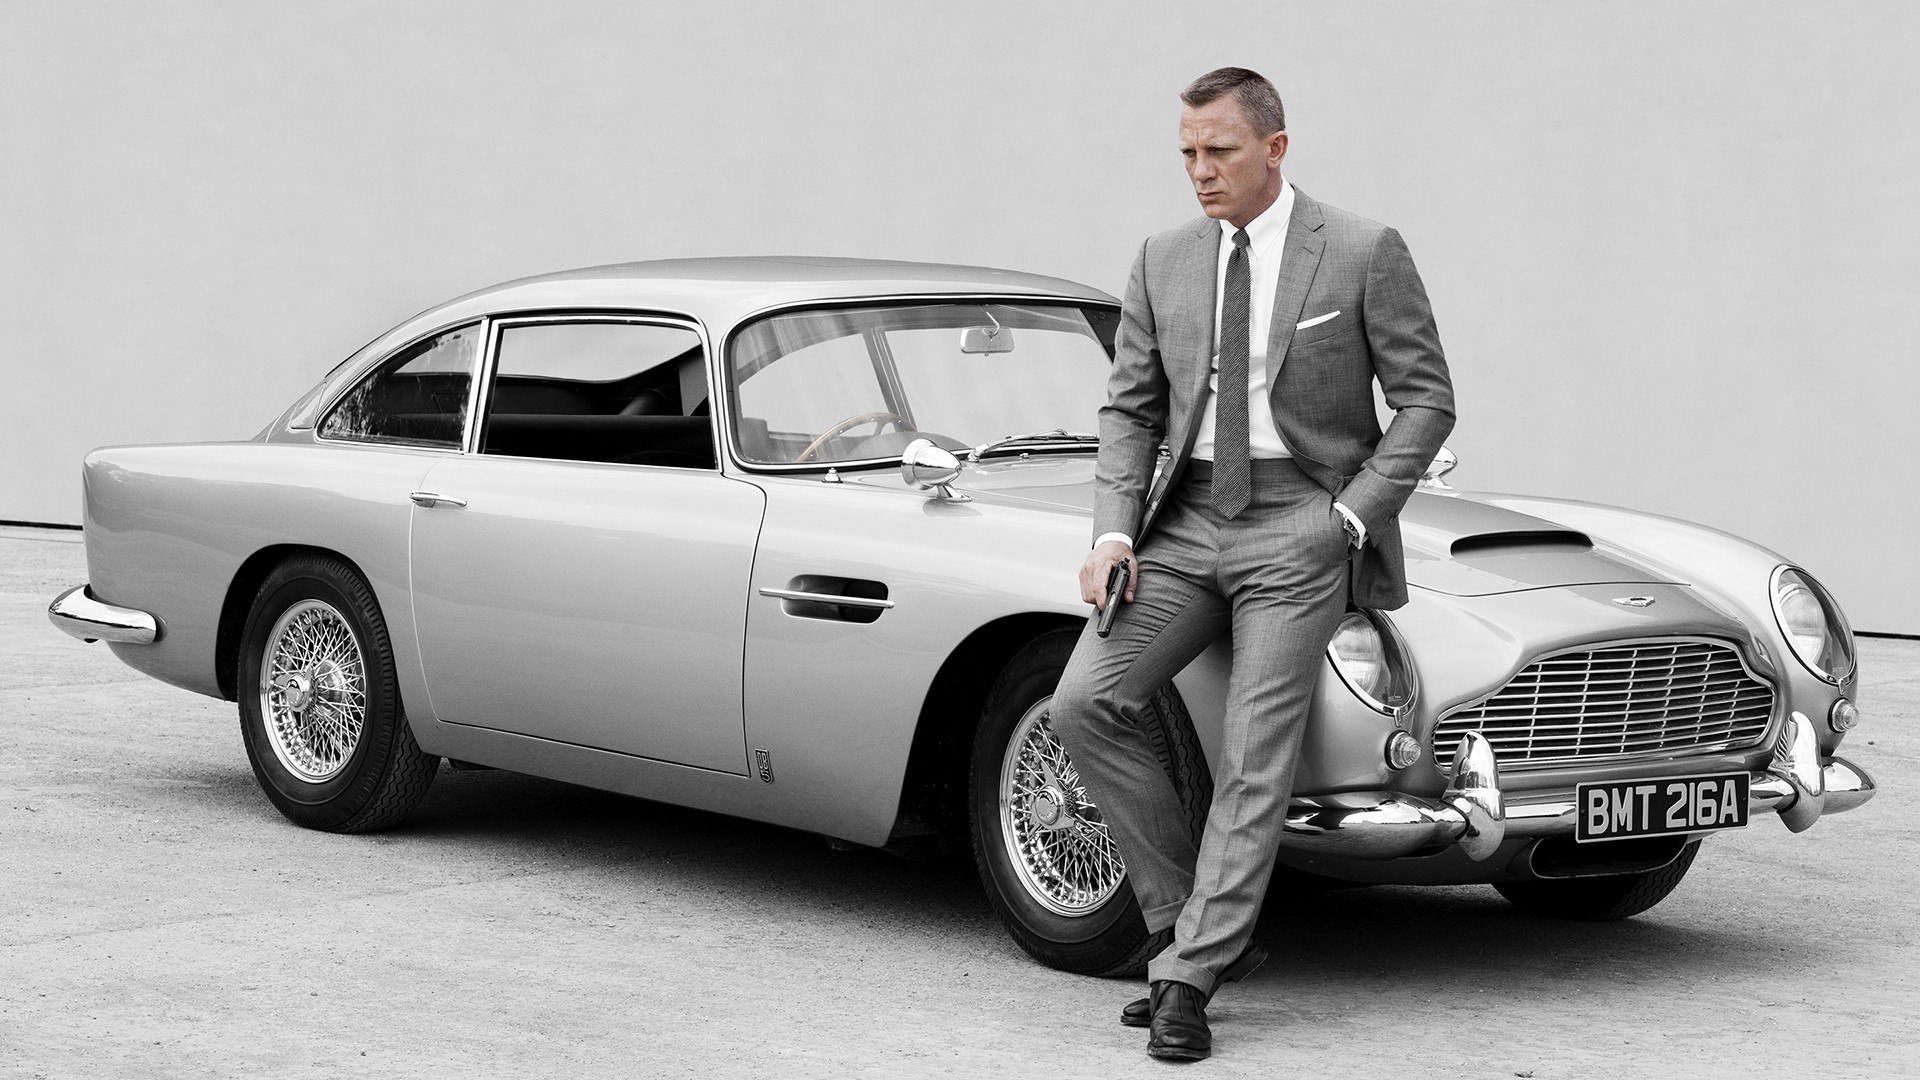 The 5 Coolest Cars Featured in James Bond Films - Movie TV Tech Geeks News